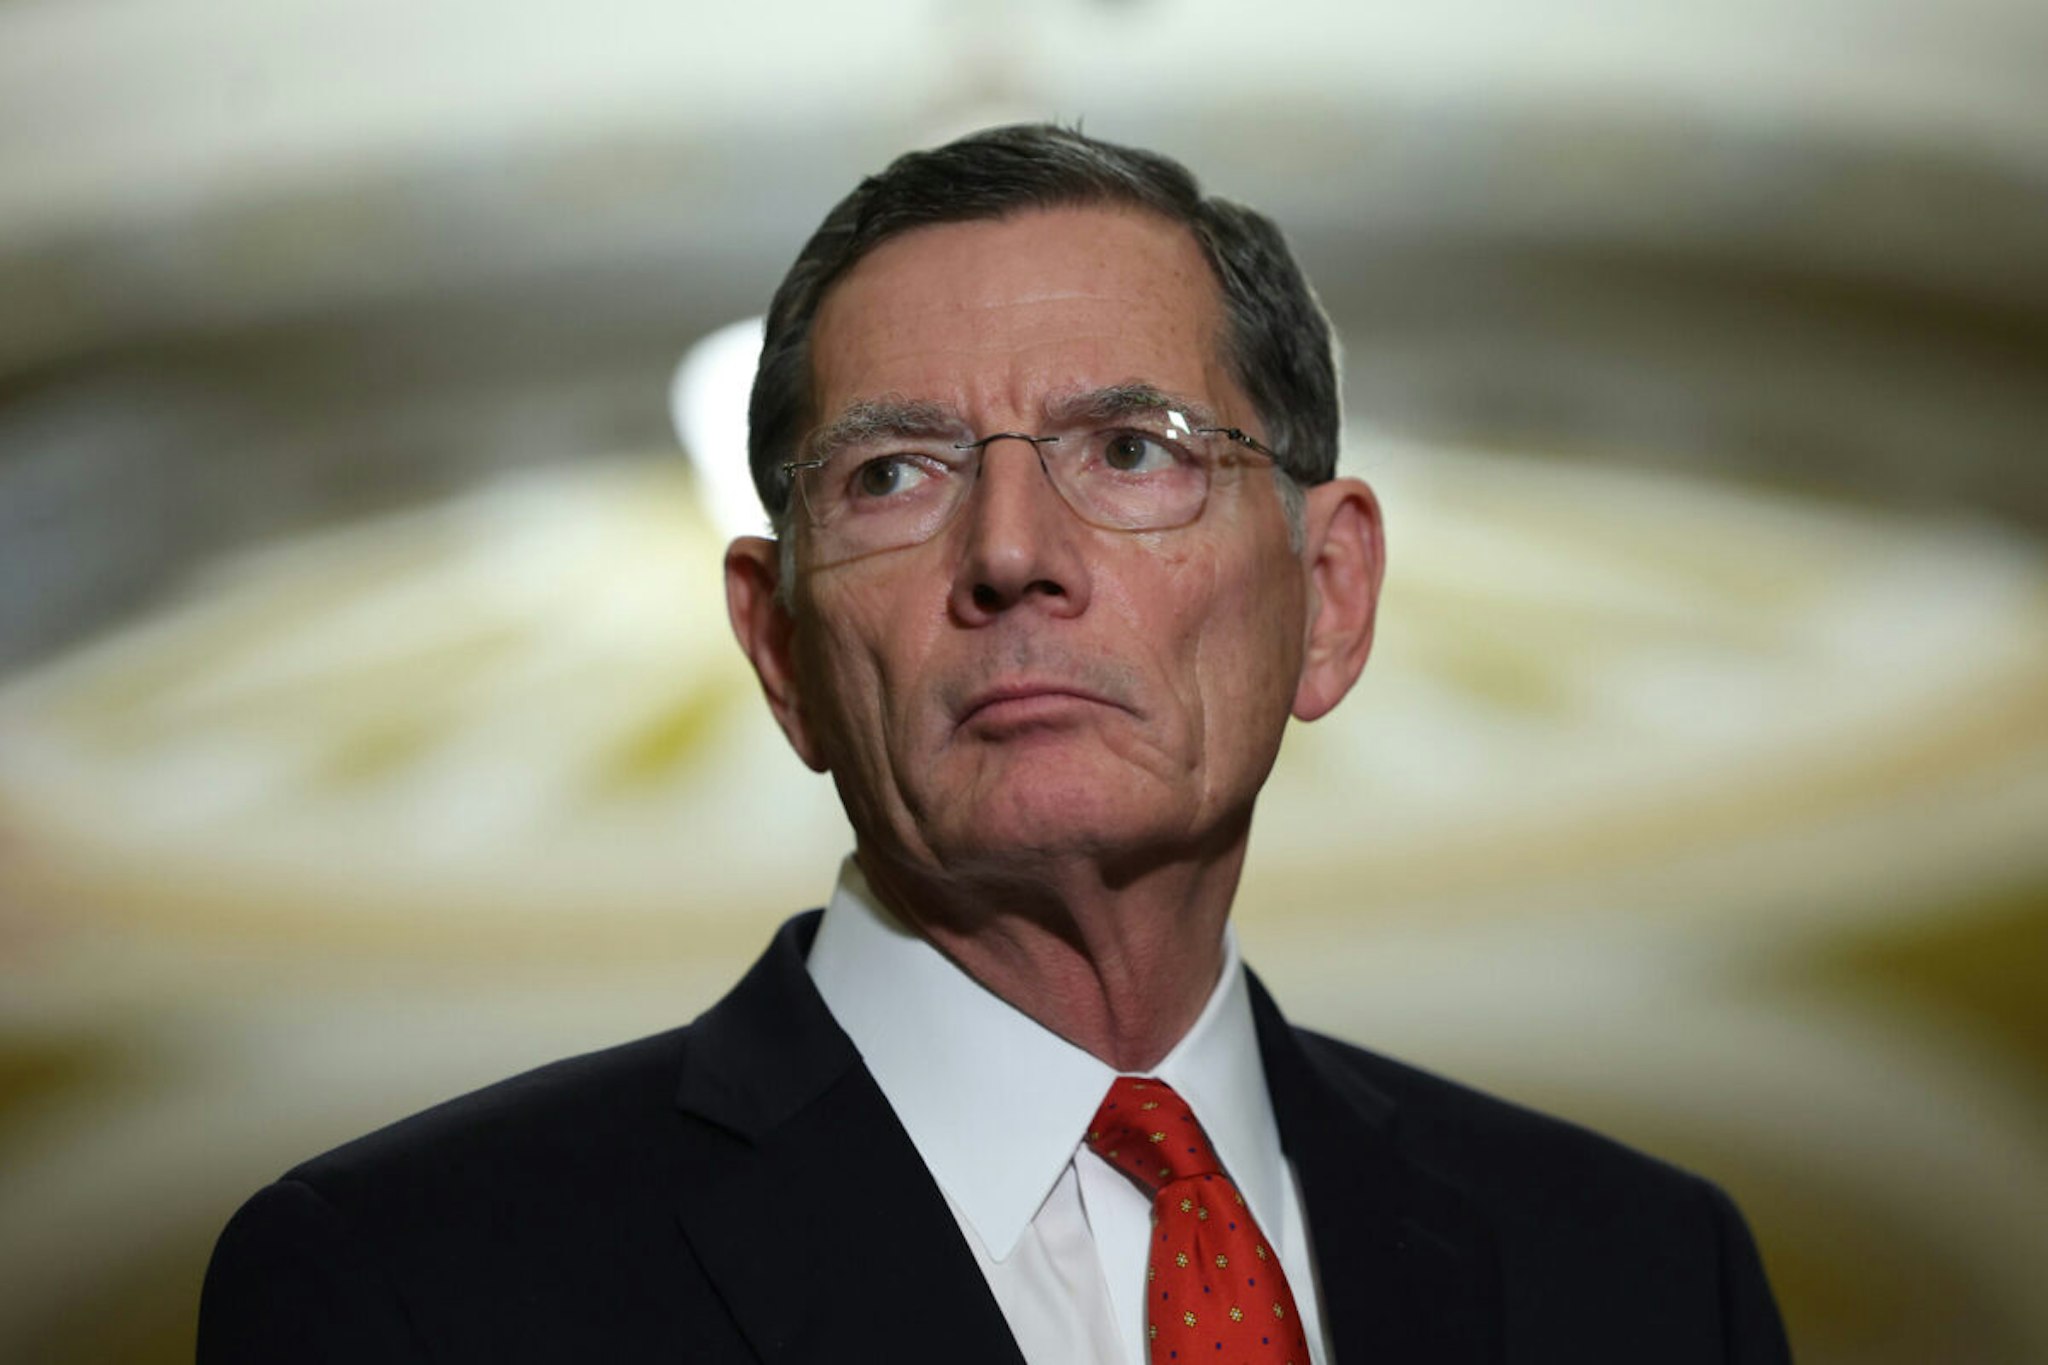 WASHINGTON, DC - DECEMBER 06: U.S. Sen. John Barrasso (R-WY) speaks to reporters following the Senate weekly policy luncheons, at the U.S. Capitol on December 06, 2022 in Washington, DC. Congress is working on passing the annual defense spending bill before funding runs out by the end of the year.